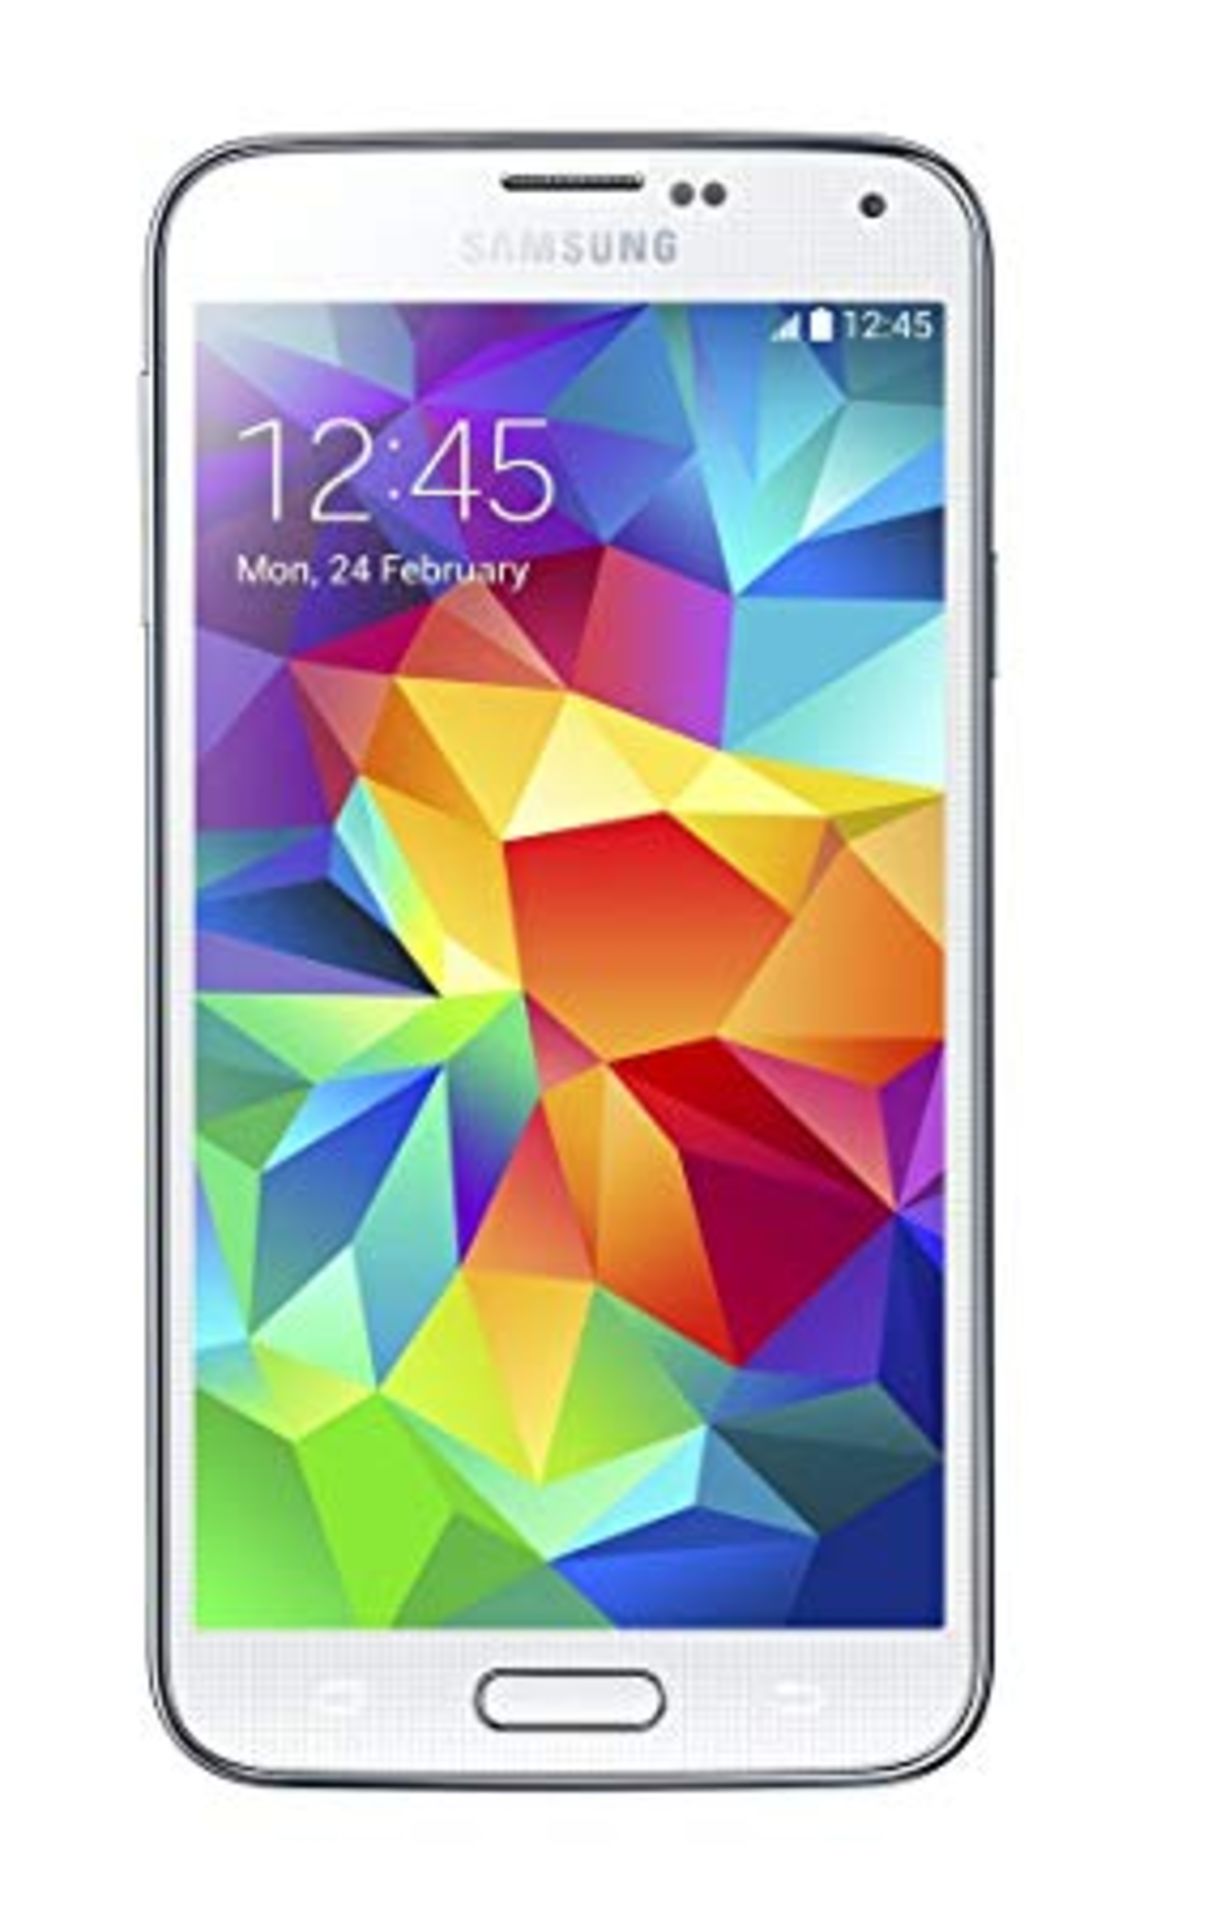 Grade A Samsung S5 ( G900F) Colours May Vary Item available approx 12 working days after sale